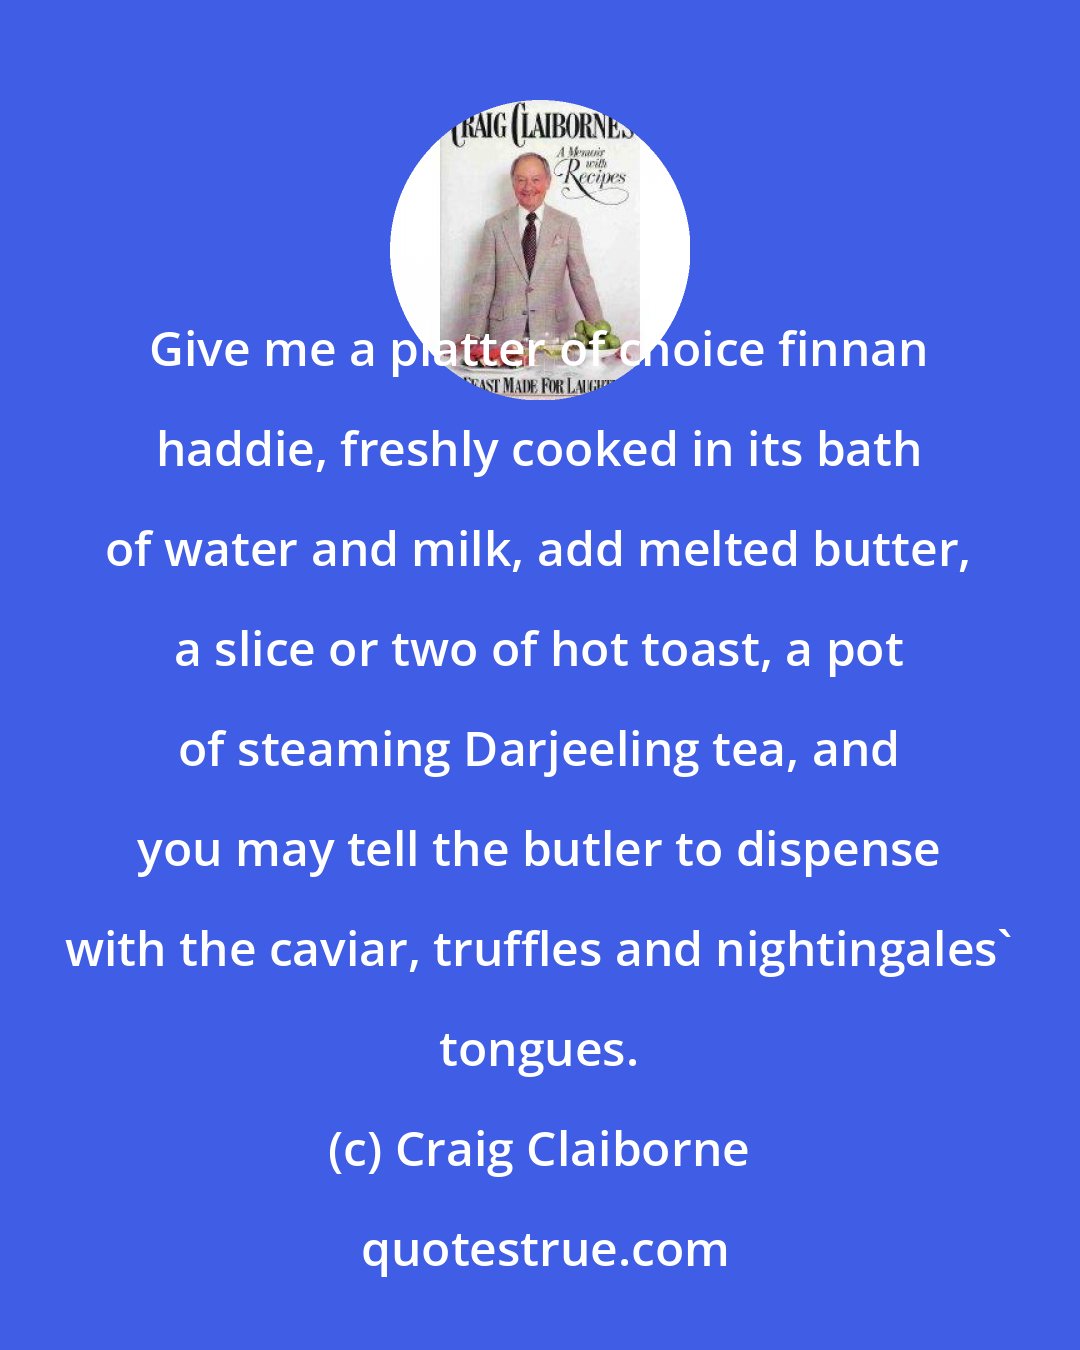 Craig Claiborne: Give me a platter of choice finnan haddie, freshly cooked in its bath of water and milk, add melted butter, a slice or two of hot toast, a pot of steaming Darjeeling tea, and you may tell the butler to dispense with the caviar, truffles and nightingales' tongues.